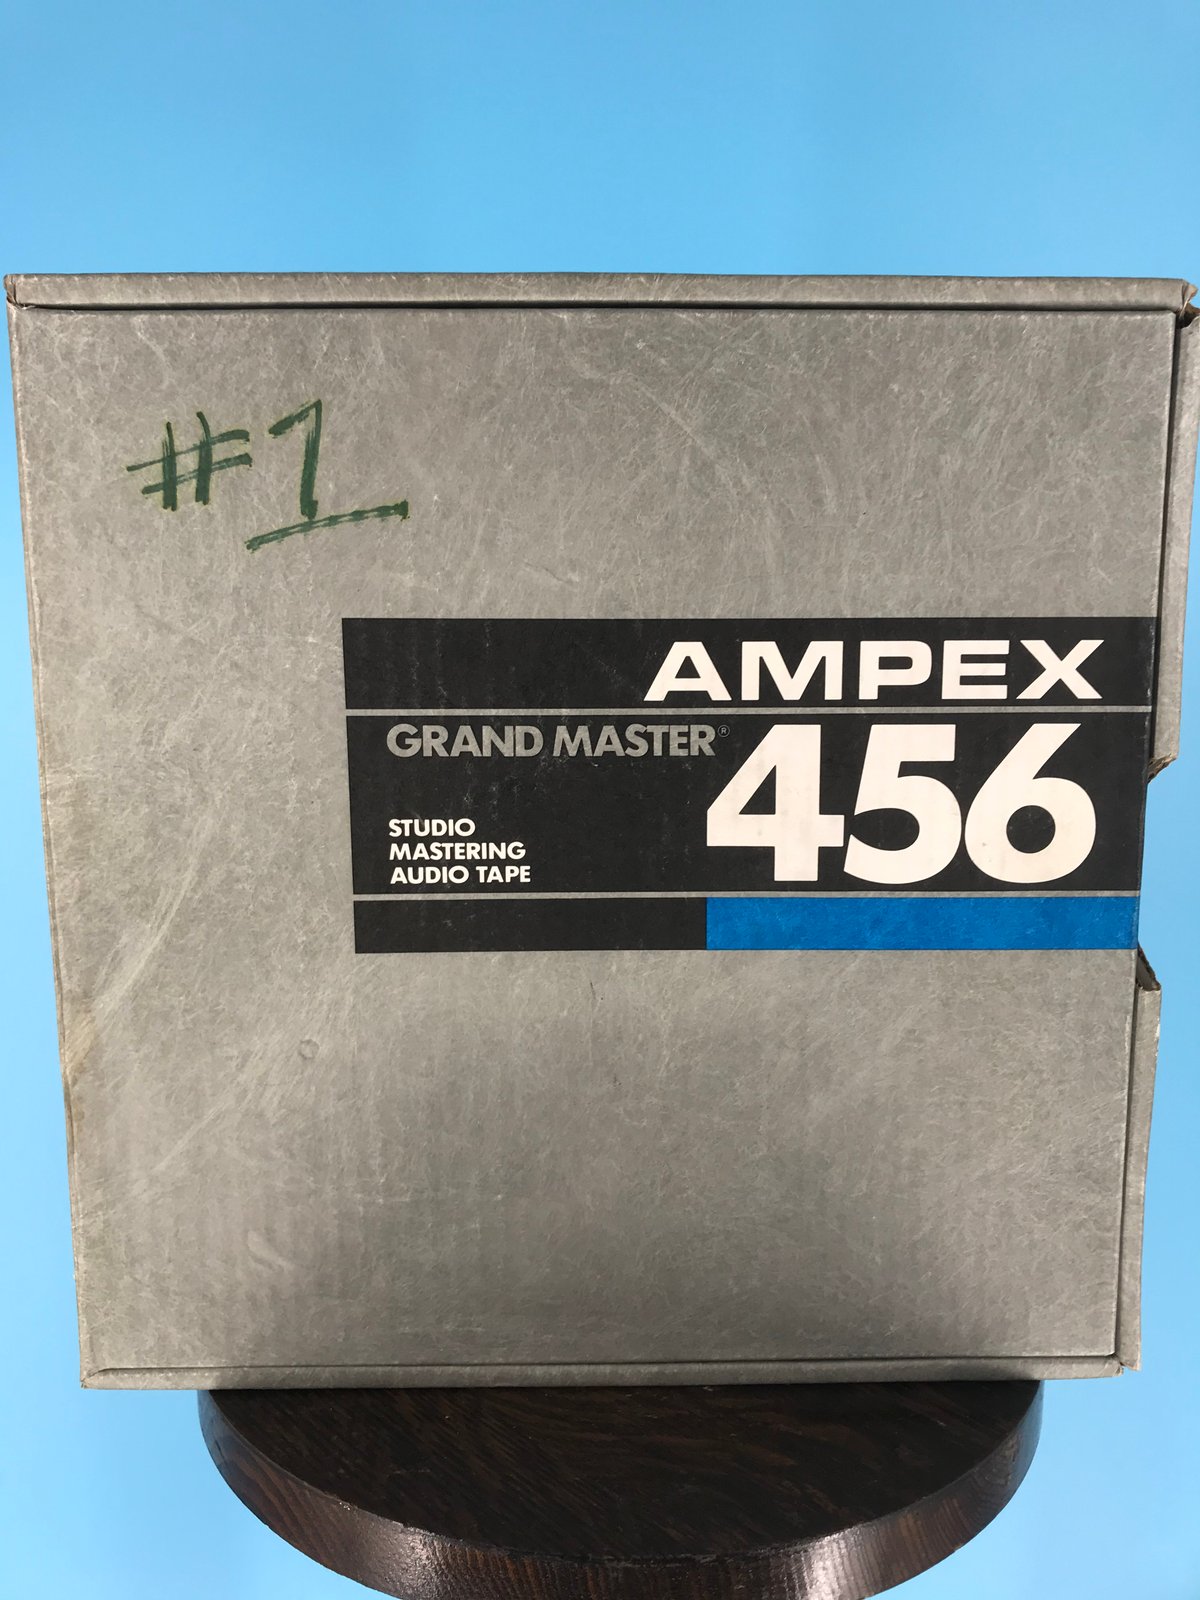 NEW Lot of 6 AMPEX Audio Mastering Reel Tapes 407 1/4' x 1800' Tape x 6 